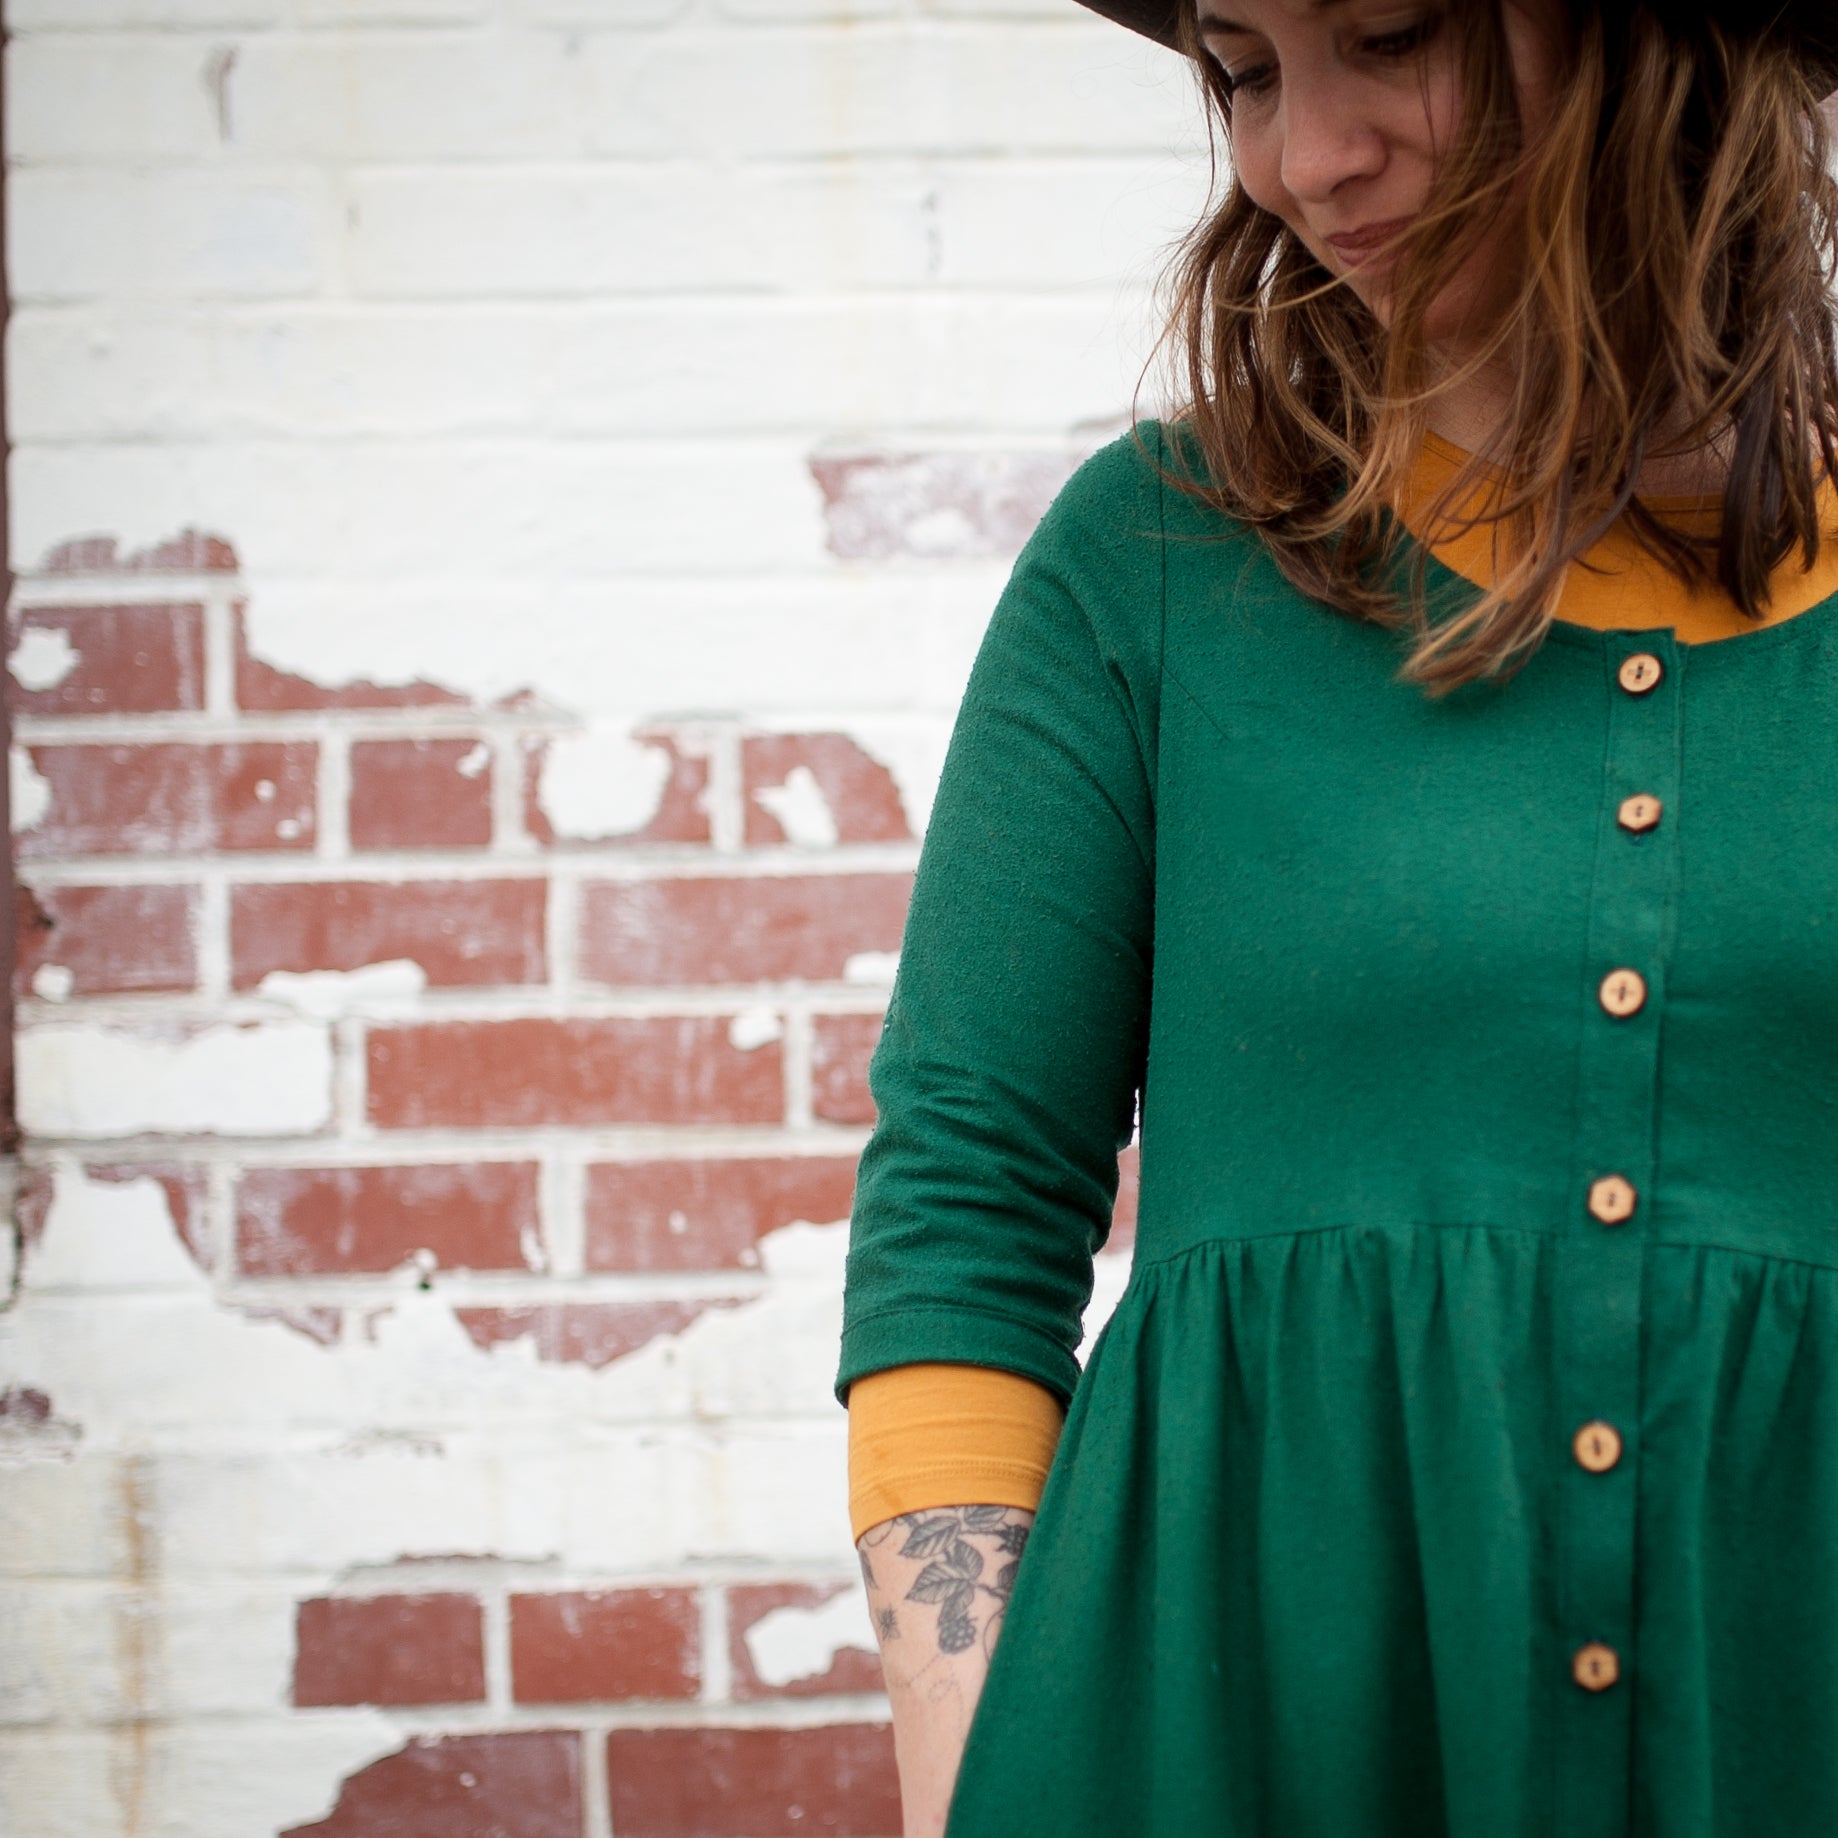 The Hinterland Dress from Sew Liberated. - Sew Dainty